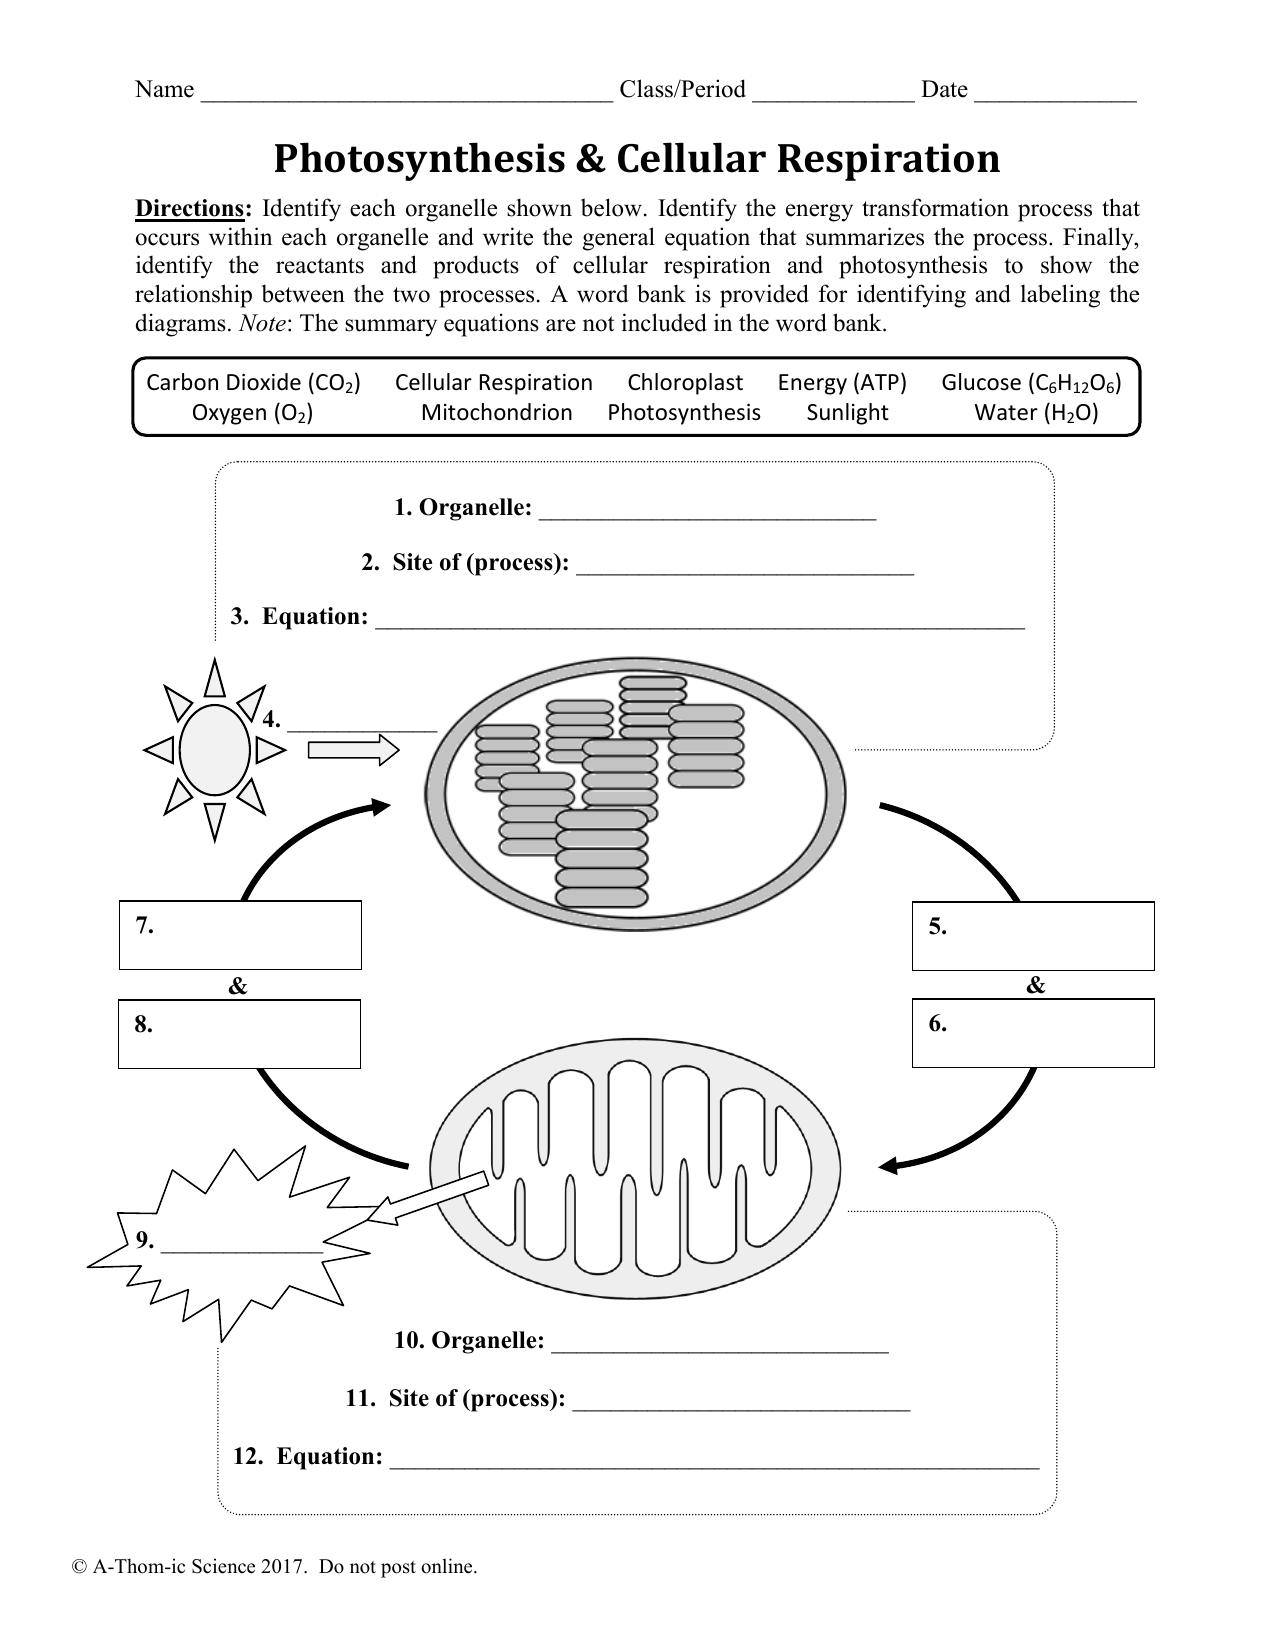 Photosynthesis and Cellular Respiration Worksheet Pertaining To Photosynthesis Diagrams Worksheet Answers